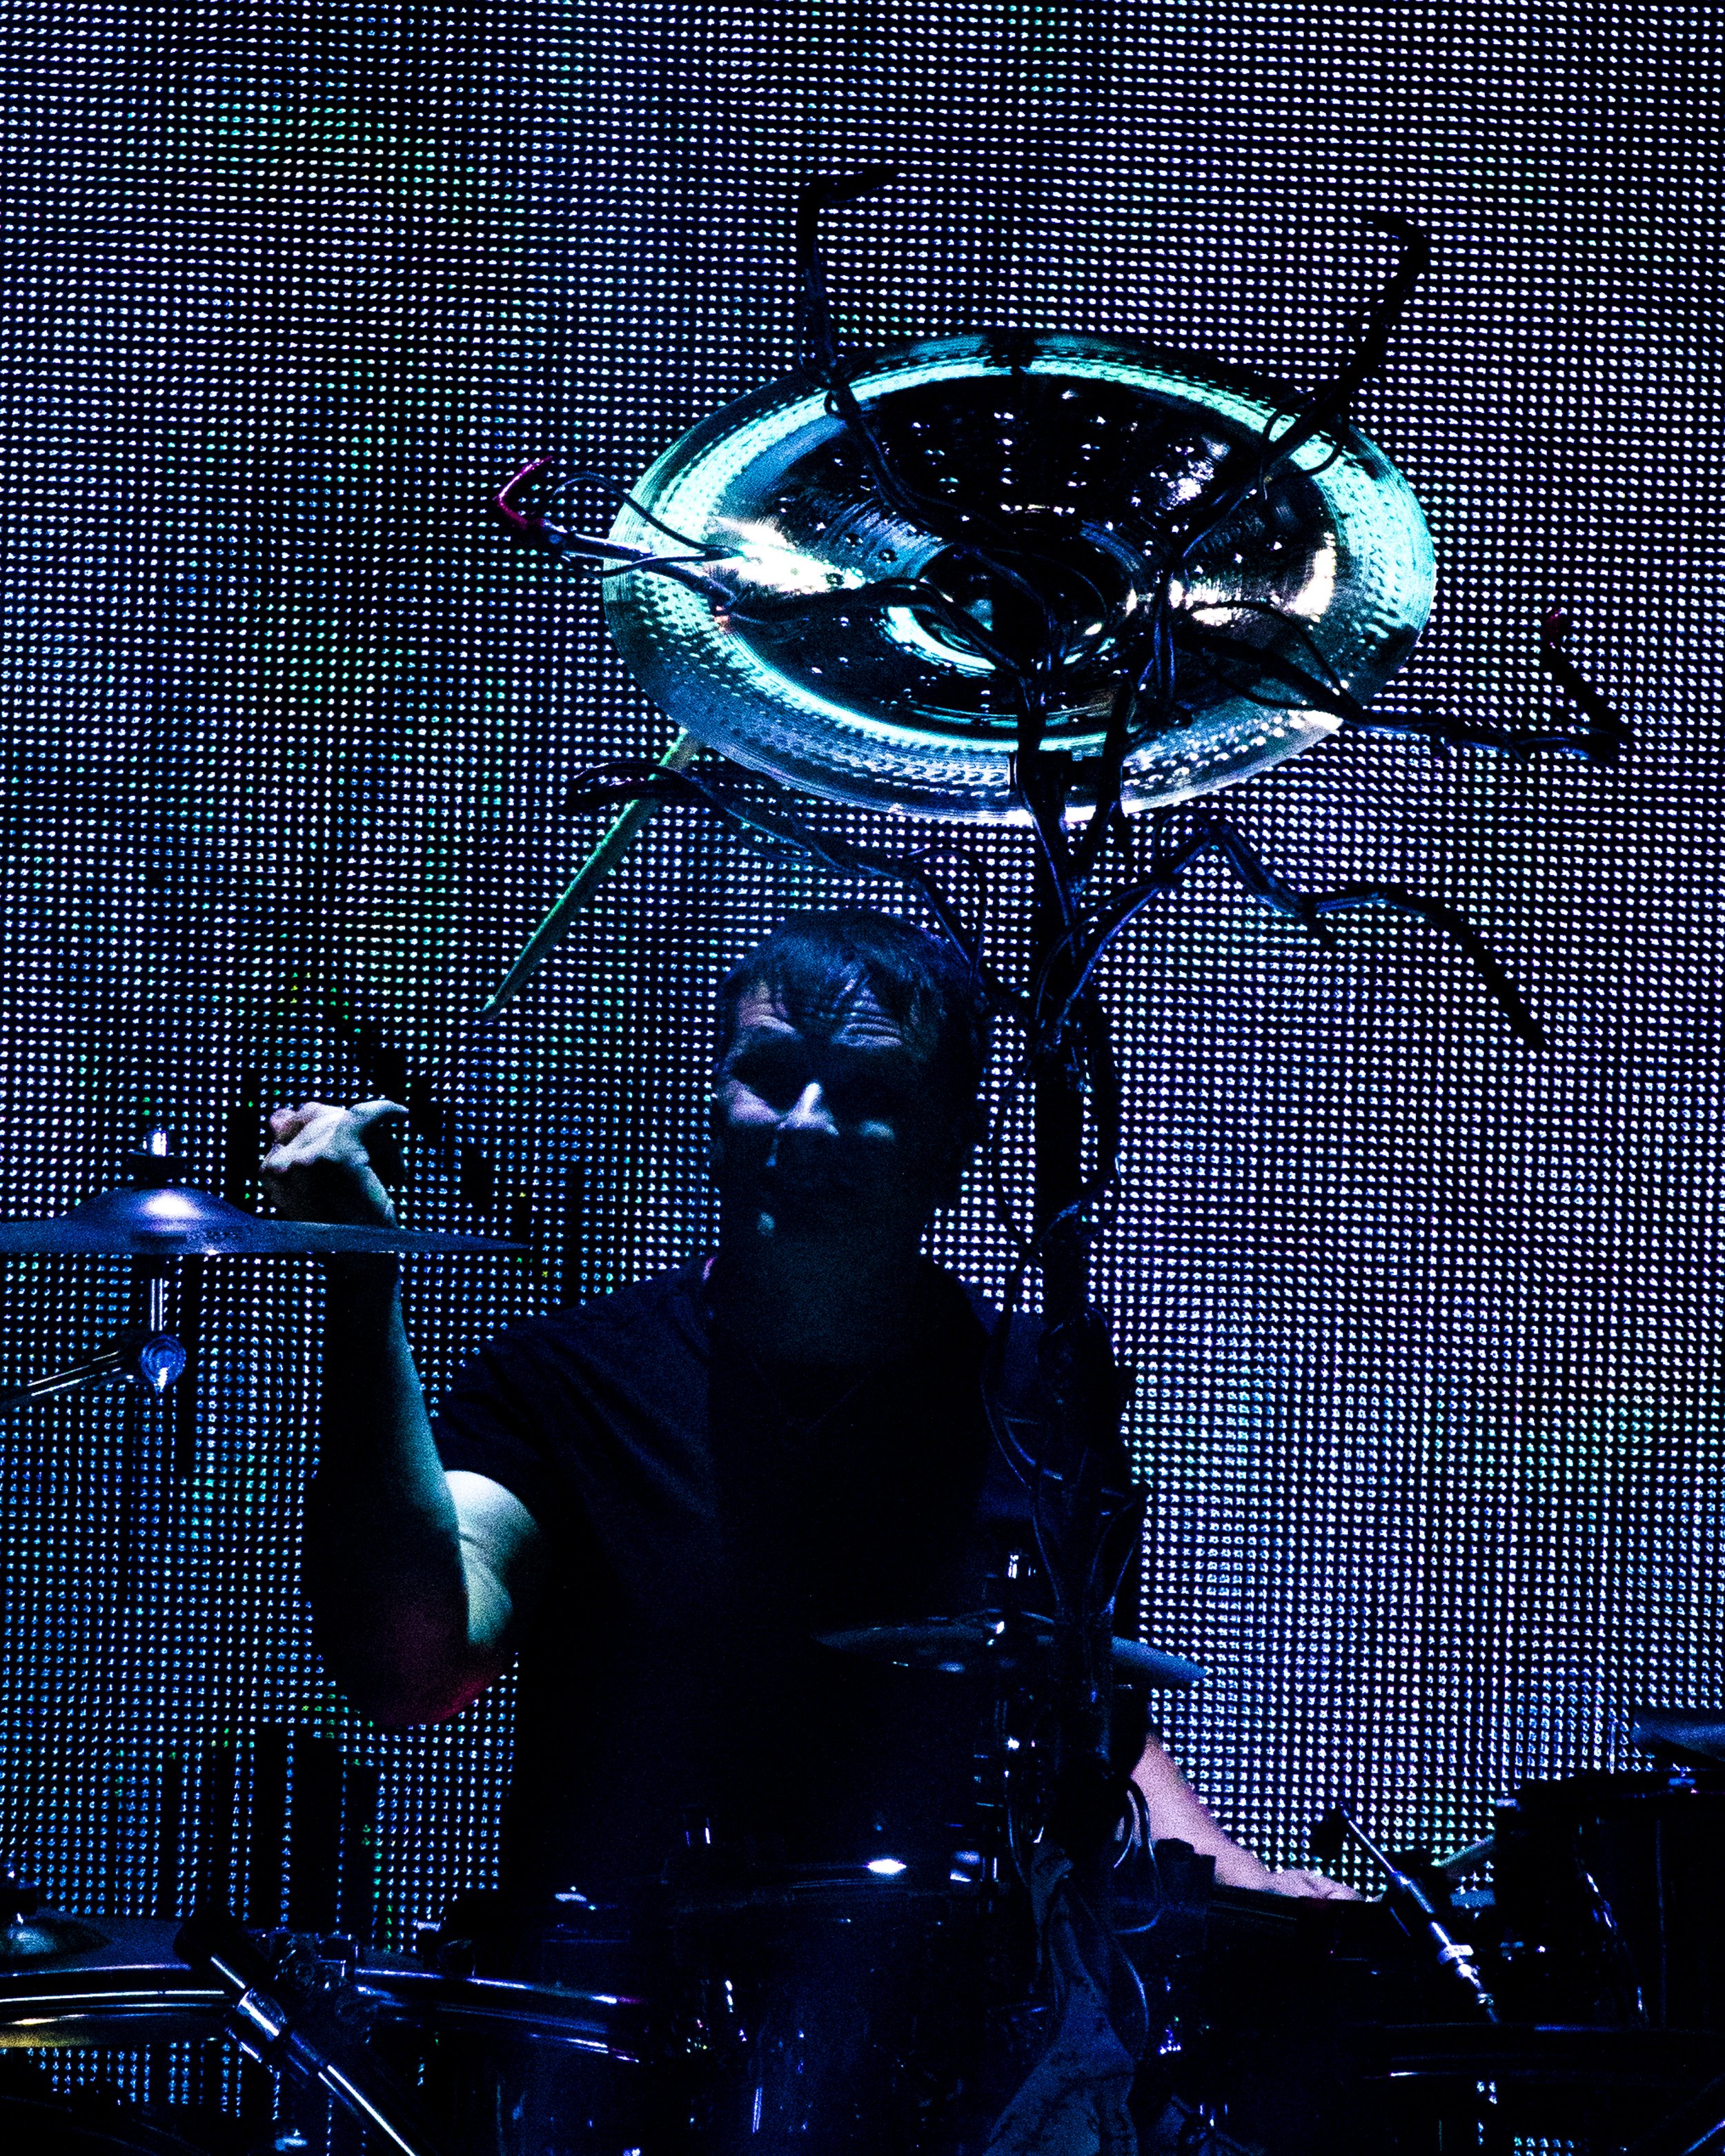 KORN - 2022 NORTH AMERICAN TOUR - Ball Arena - Denver, Colorado - Tuesday, August 16, 2022 - PHOTO BY Mowgli Miles of Interracial Friends - PHOTO BY Mowgli Miles of Interracial Friends-106.JPG